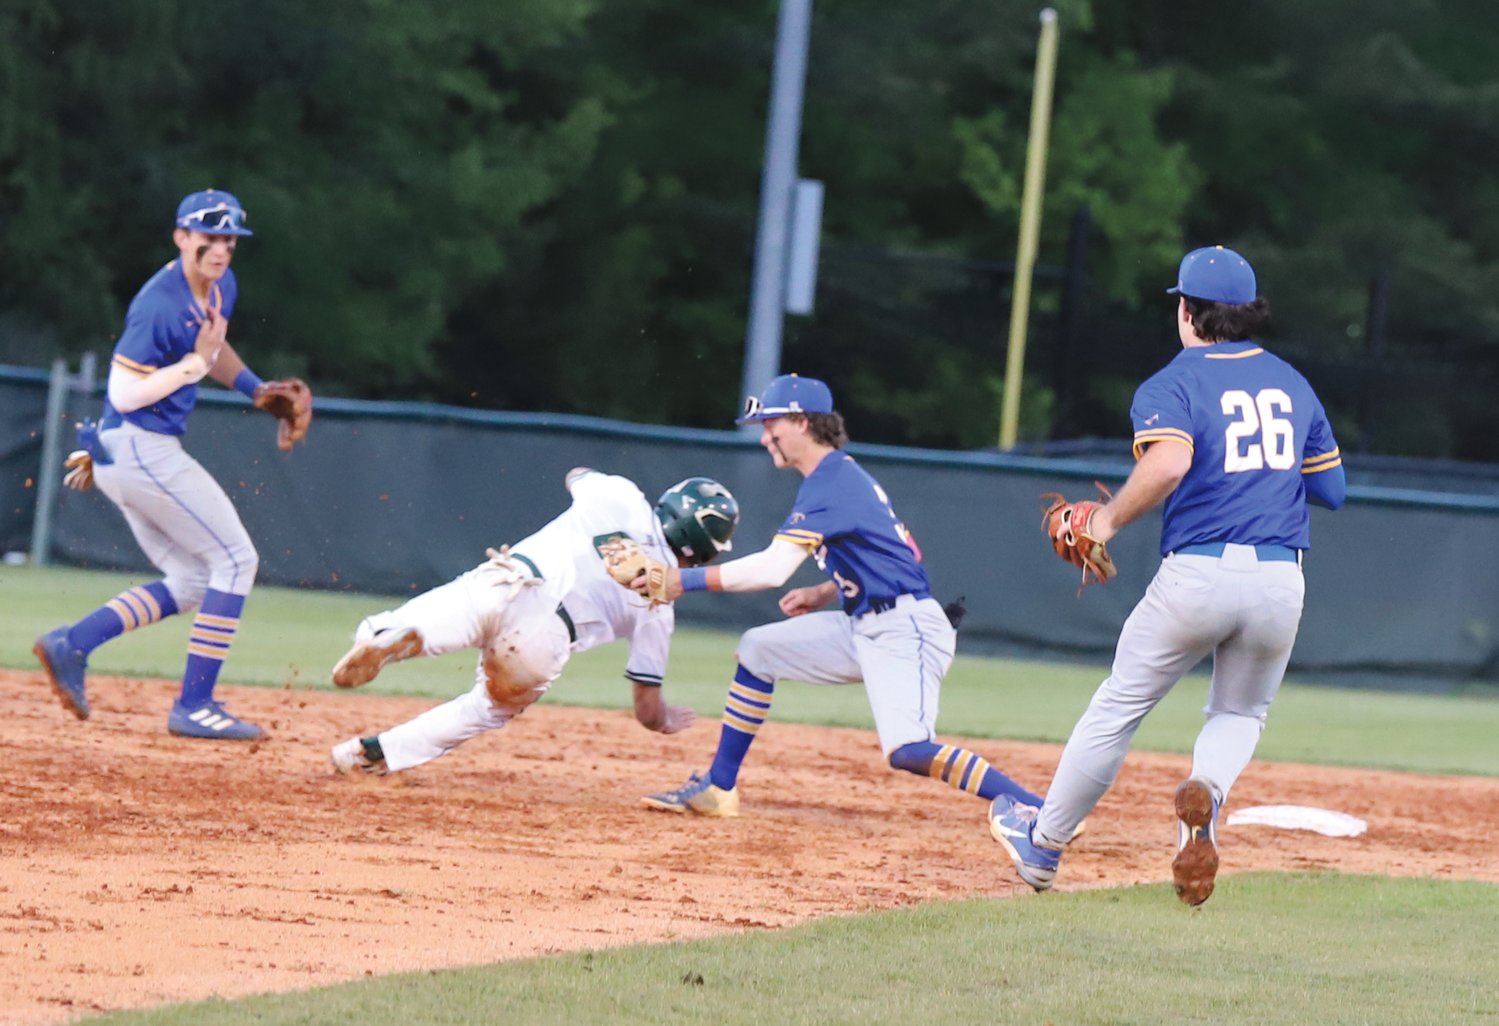 Lexington second baseman Gabe Herold with the tag out of Dutch Fork's Paul Taylor in the fifth inning.